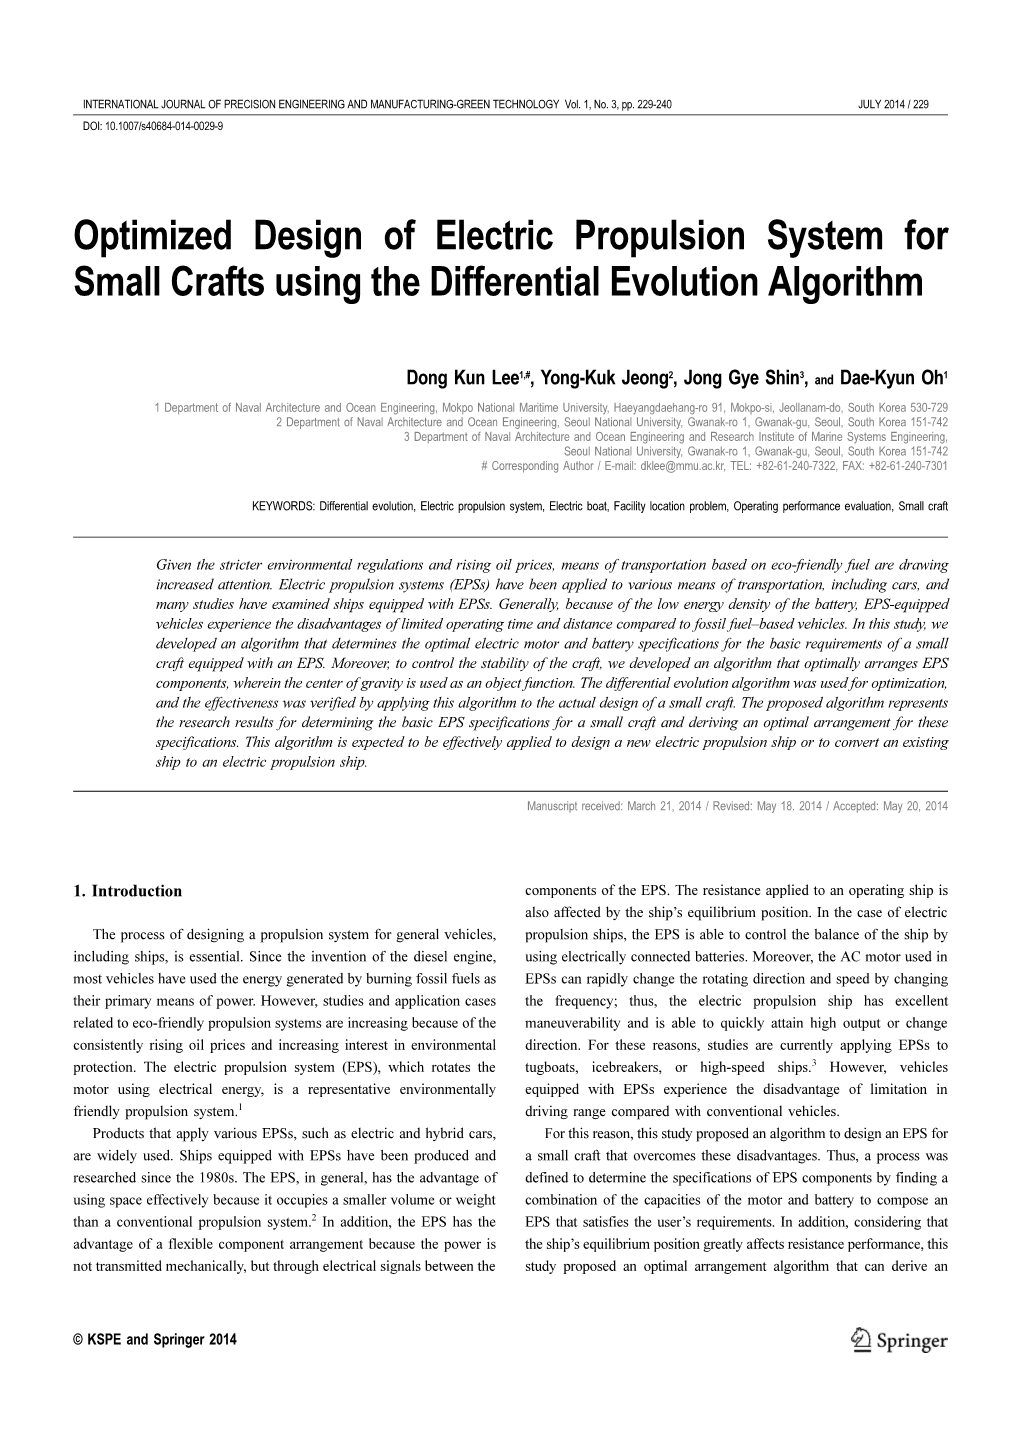 Optimized Design of Electric Propulsion System for Small Crafts Using the Differential Evolution Algorithm